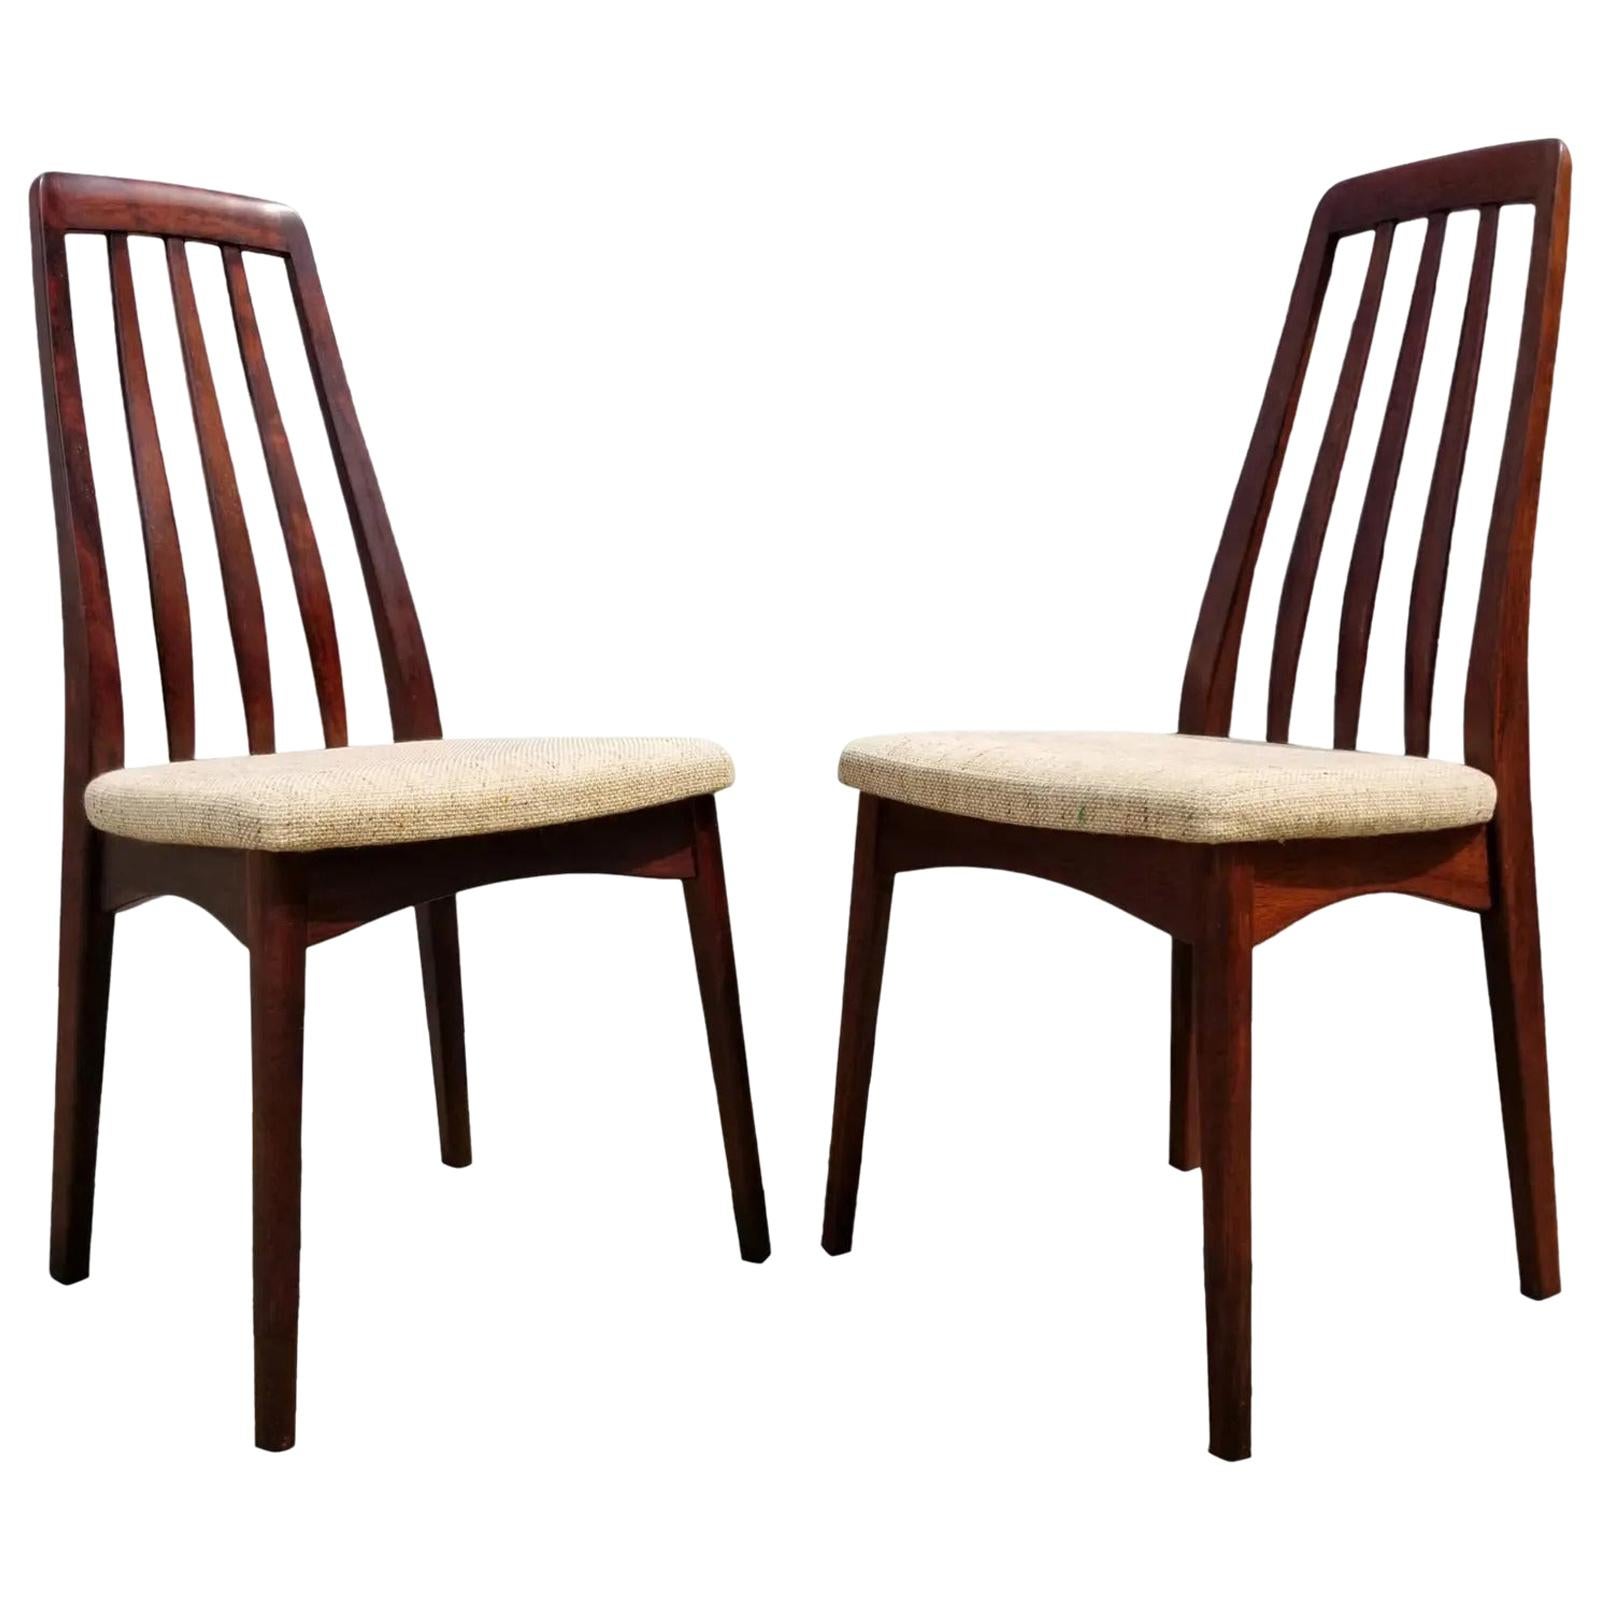 Rosewood Danish Modern Dining Chairs by Svegards, a Pair